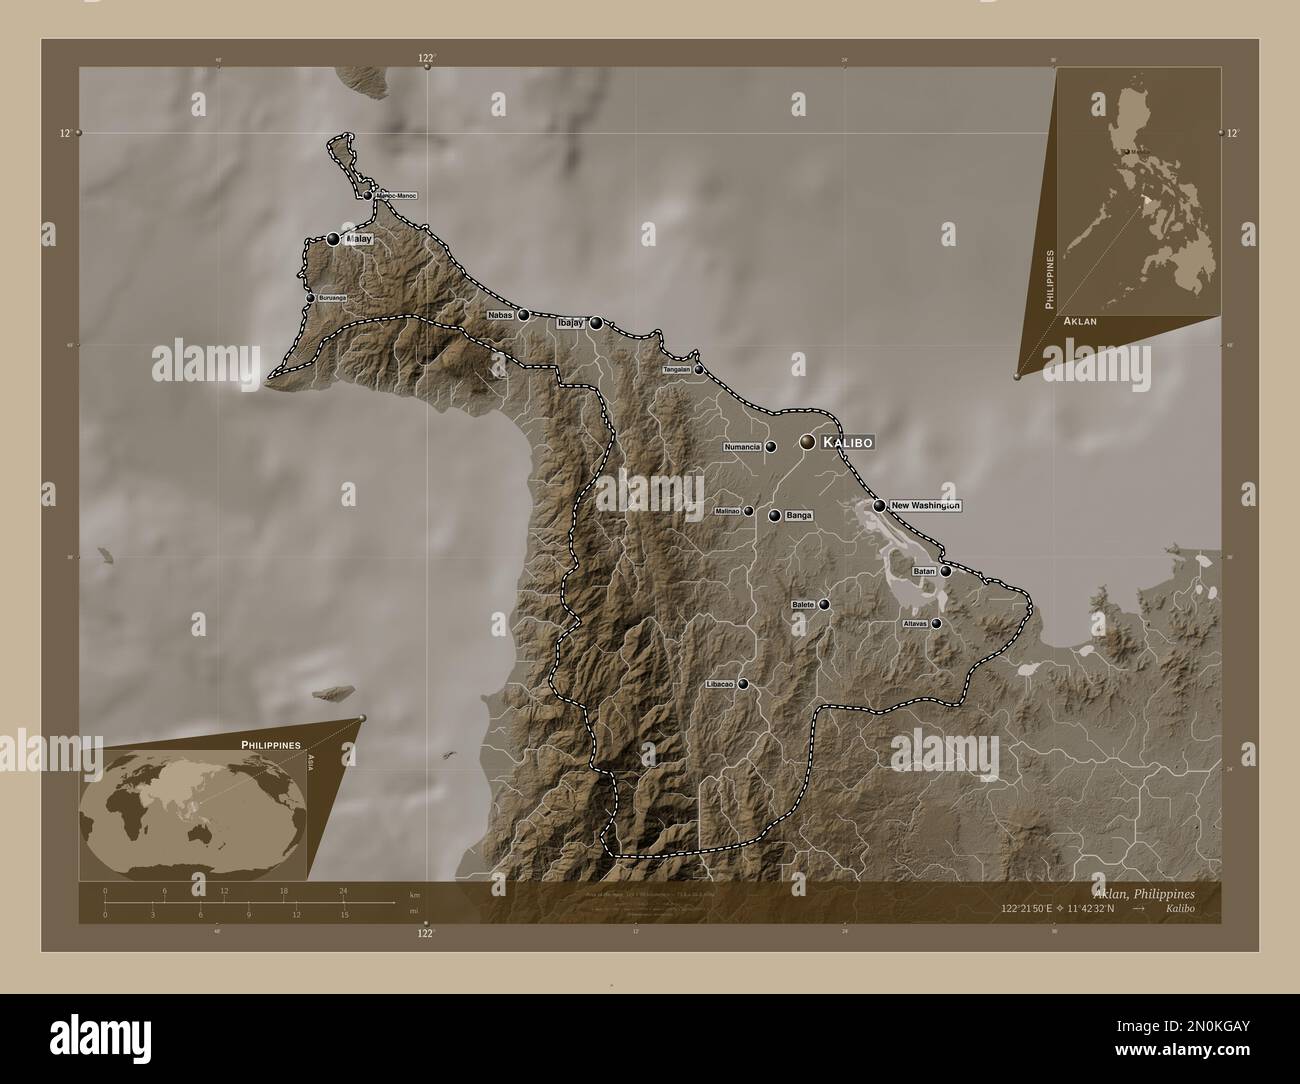 Aklan, province of Philippines. Elevation map colored in sepia tones with lakes and rivers. Locations and names of major cities of the region. Corner Stock Photo